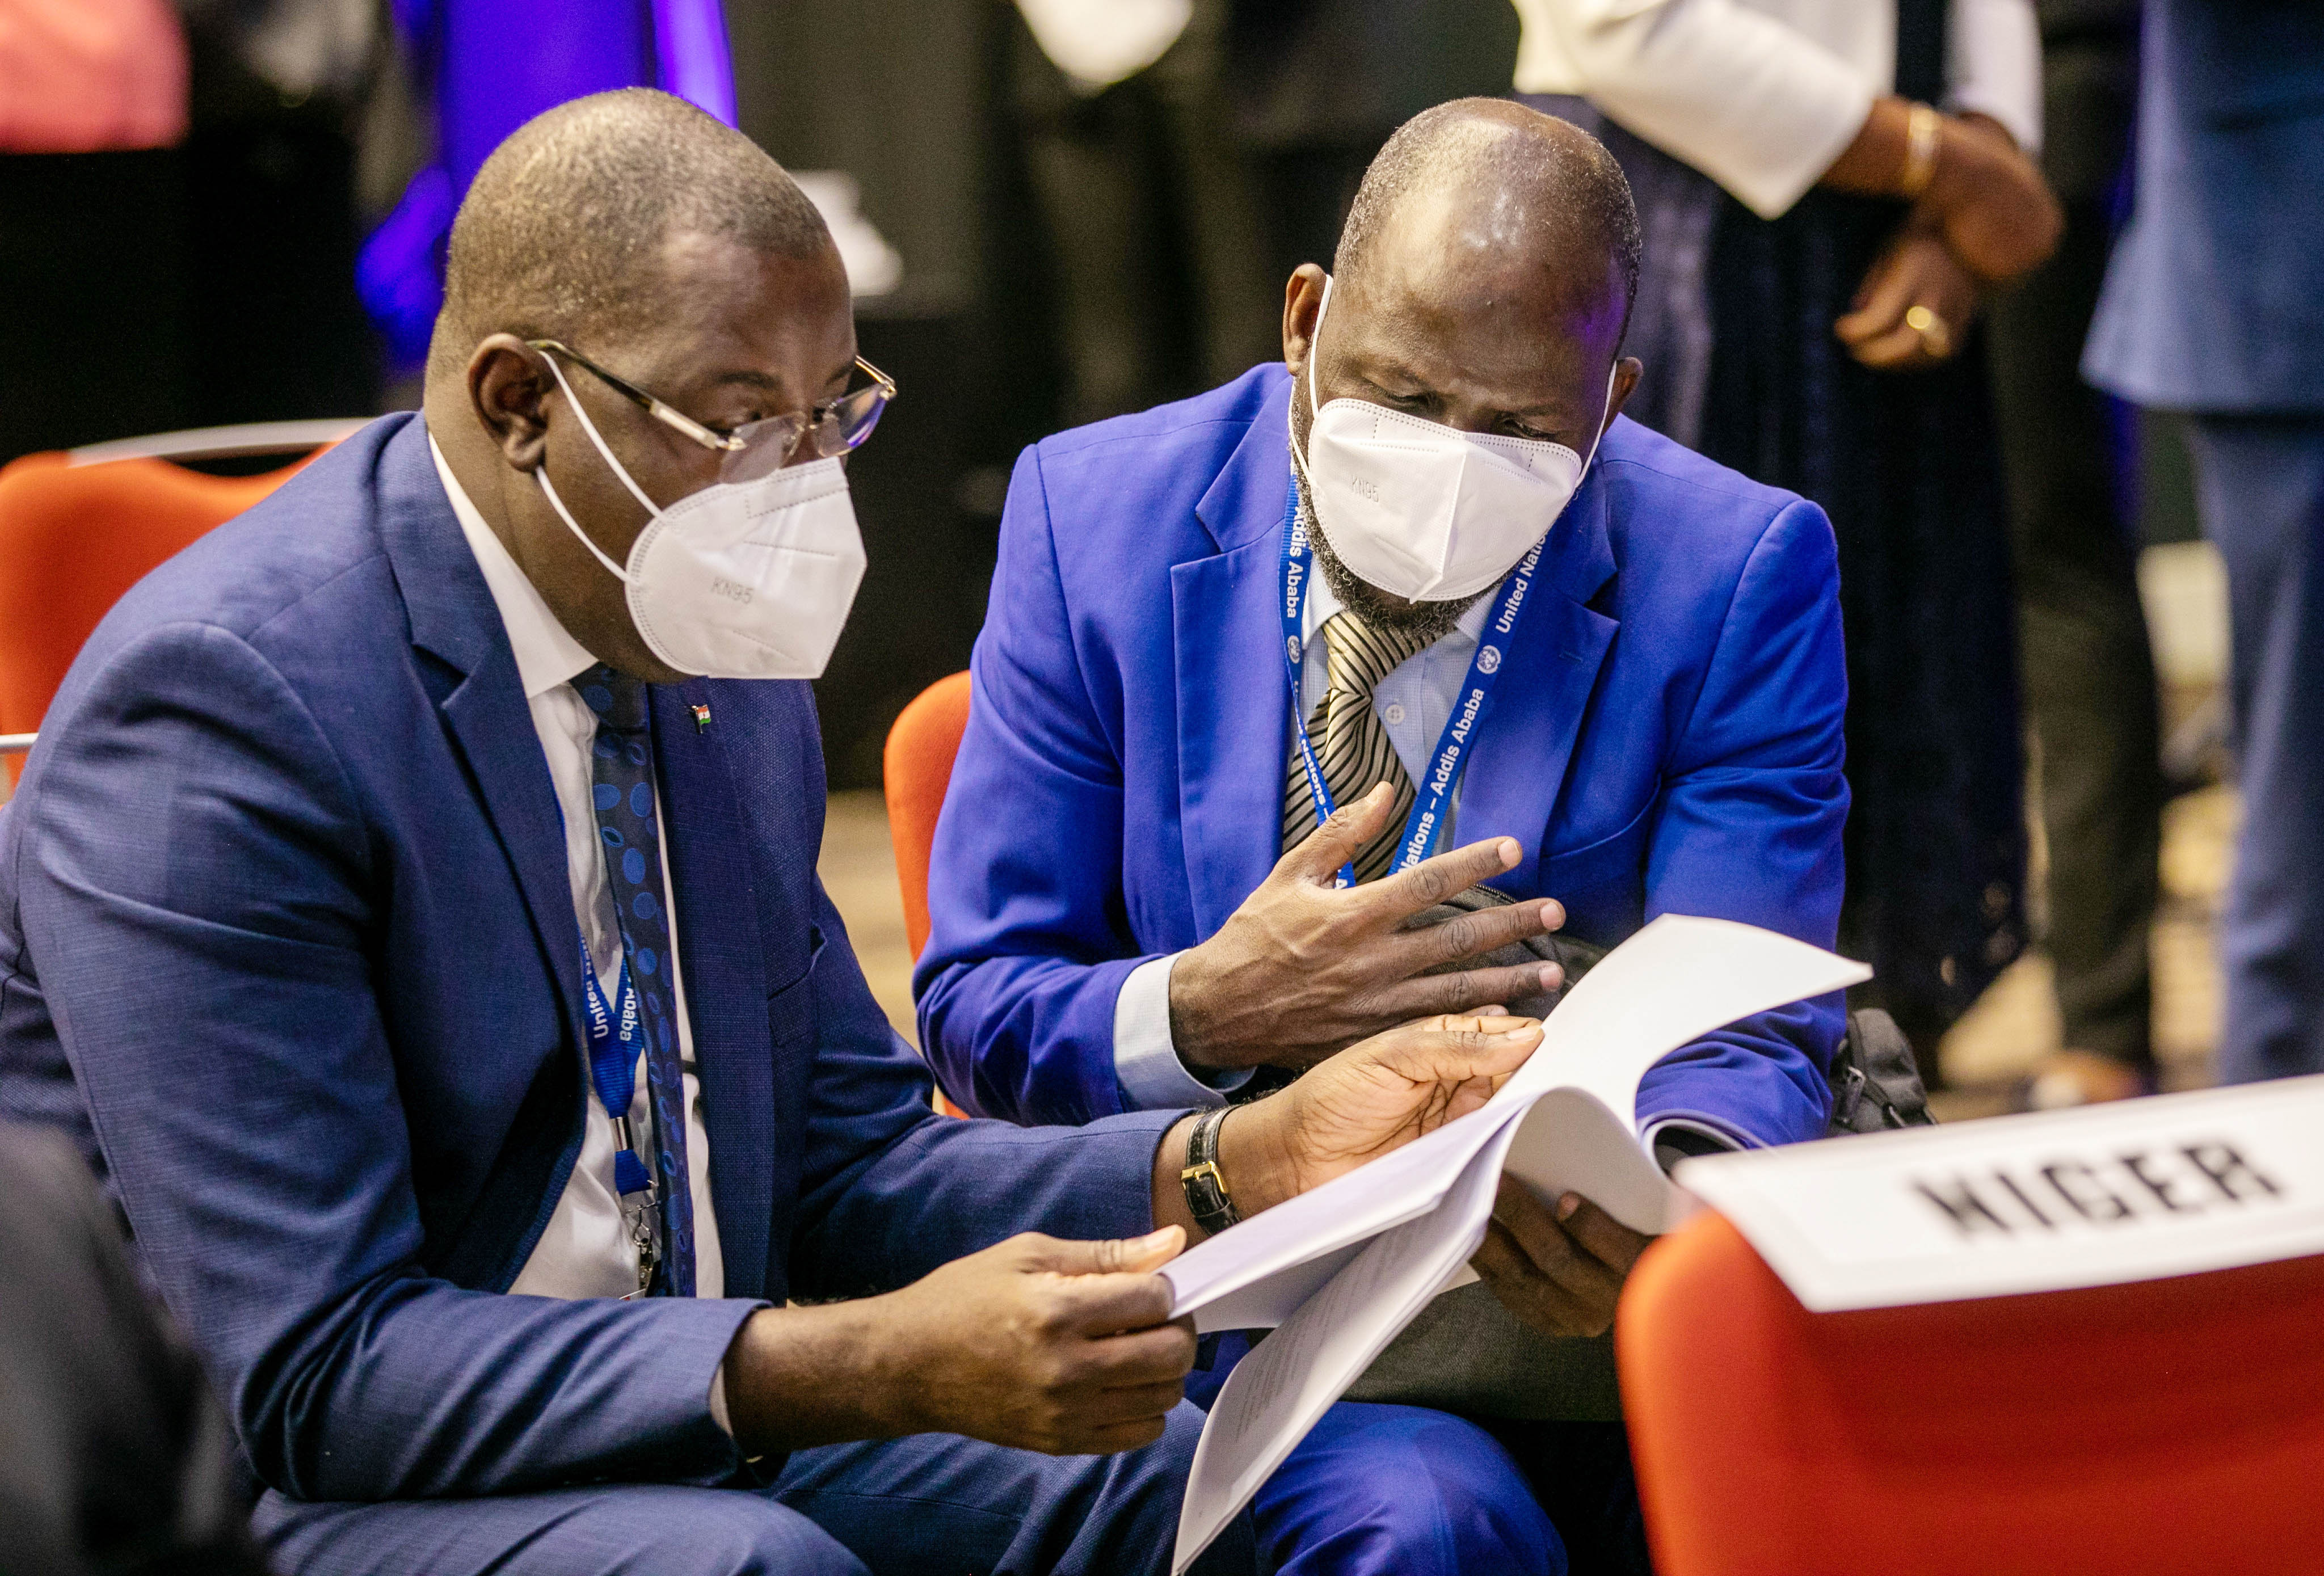 Delegates consult each other during the Africa Regional Forum on Sustainable Development in Kigali on March 3, 2022.Photo by Olivier Mugwiza